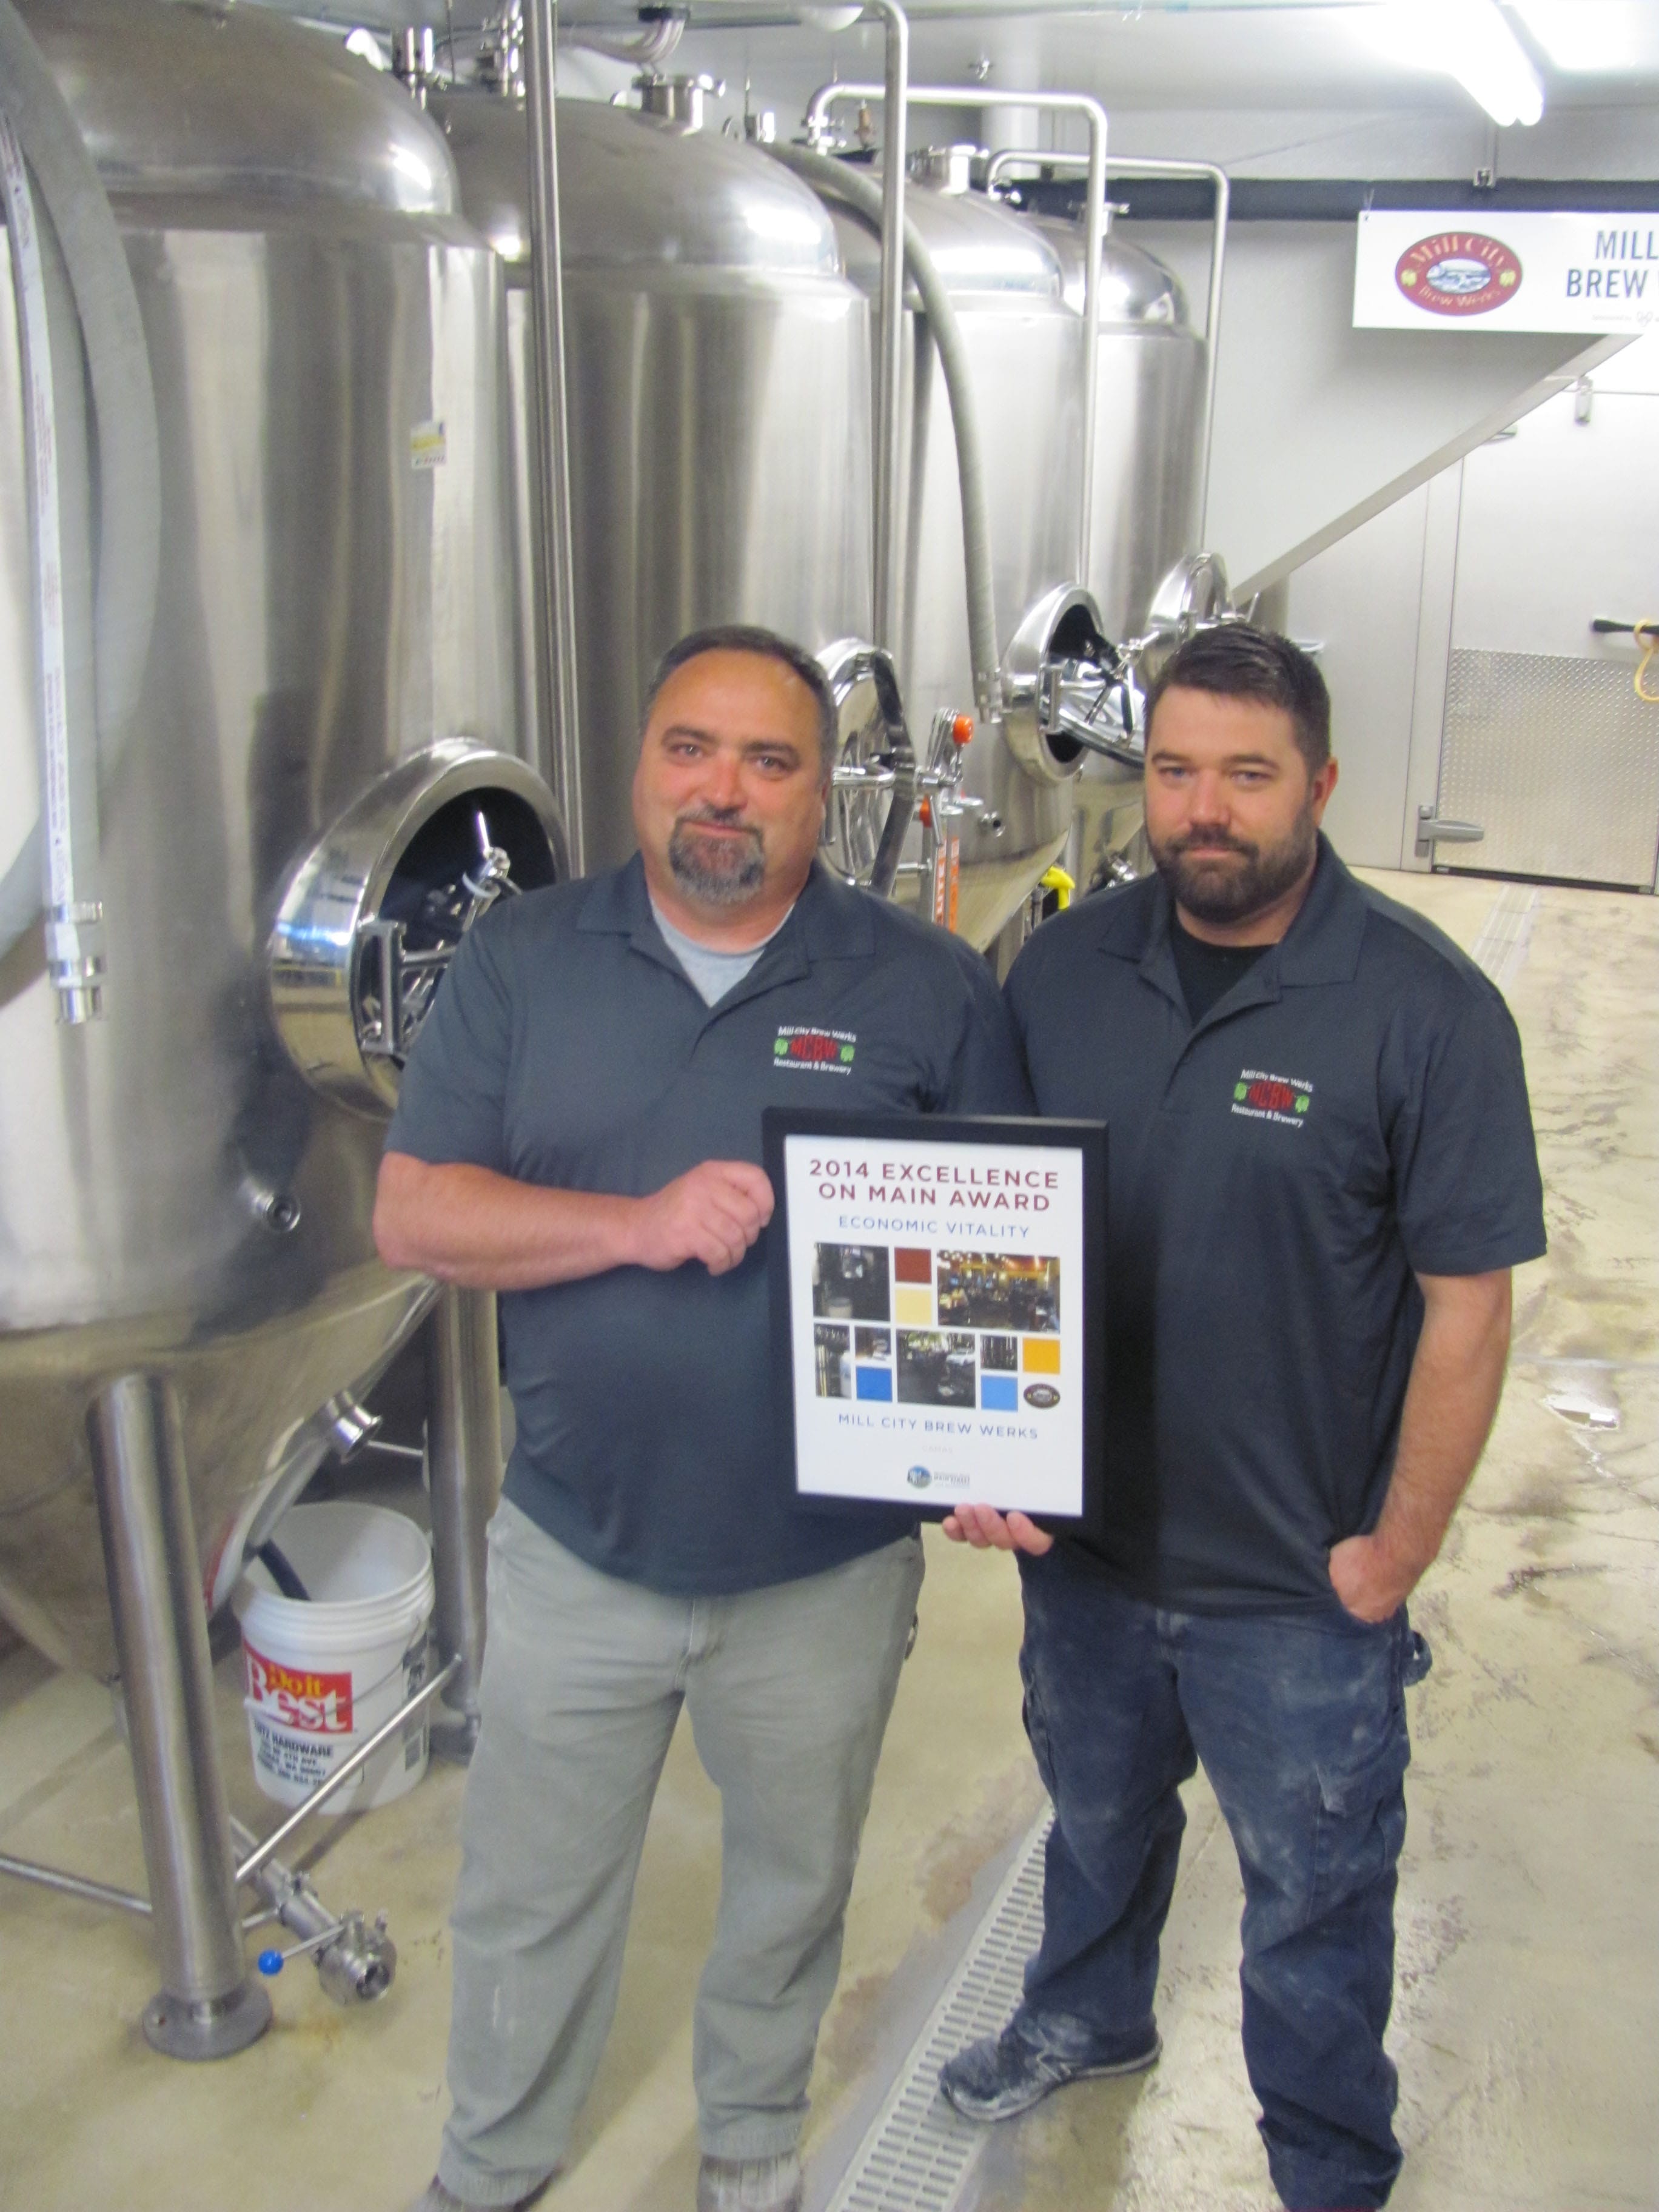 Mill City Brew Werks owner Mark Zech (left) and General Manager/Brewer Chris Daniels (right) stand with an Excellence on Main award from the Washington State Main Street Program.